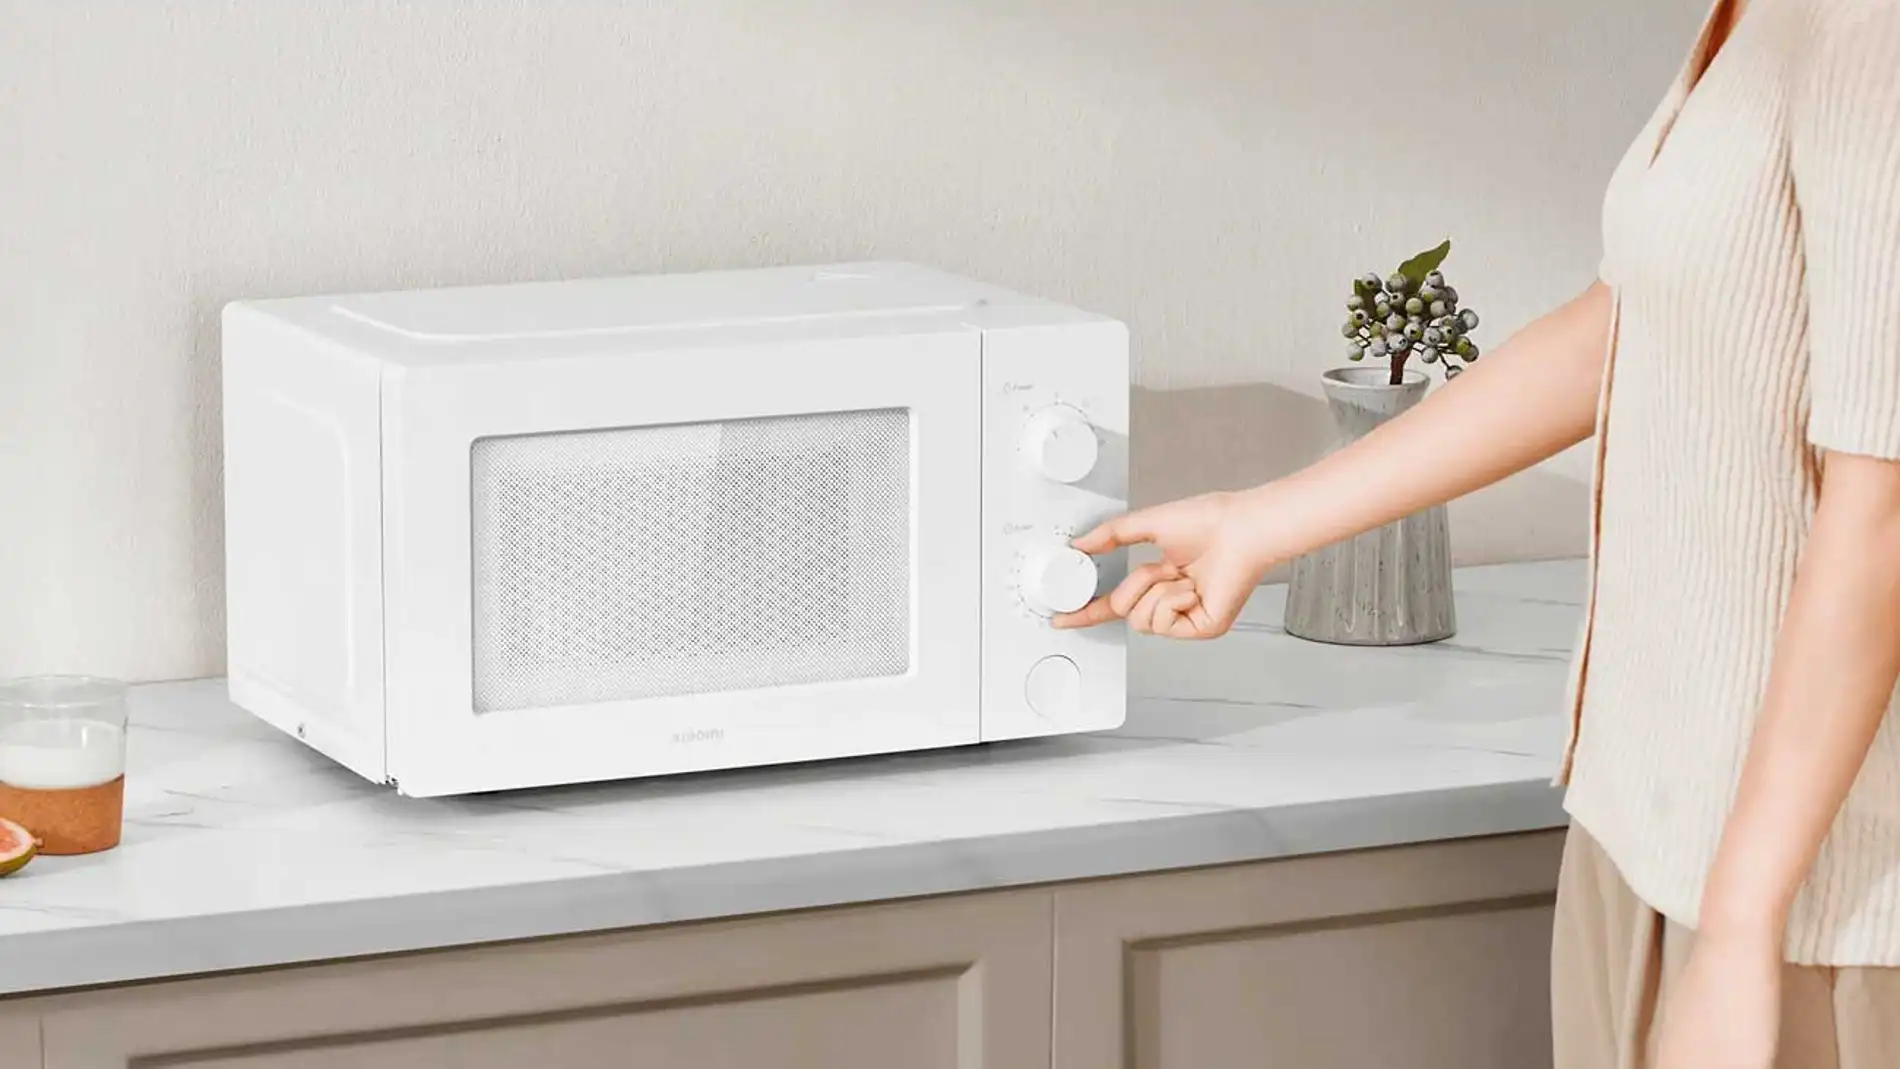 Xiaomi Microwave Oven]